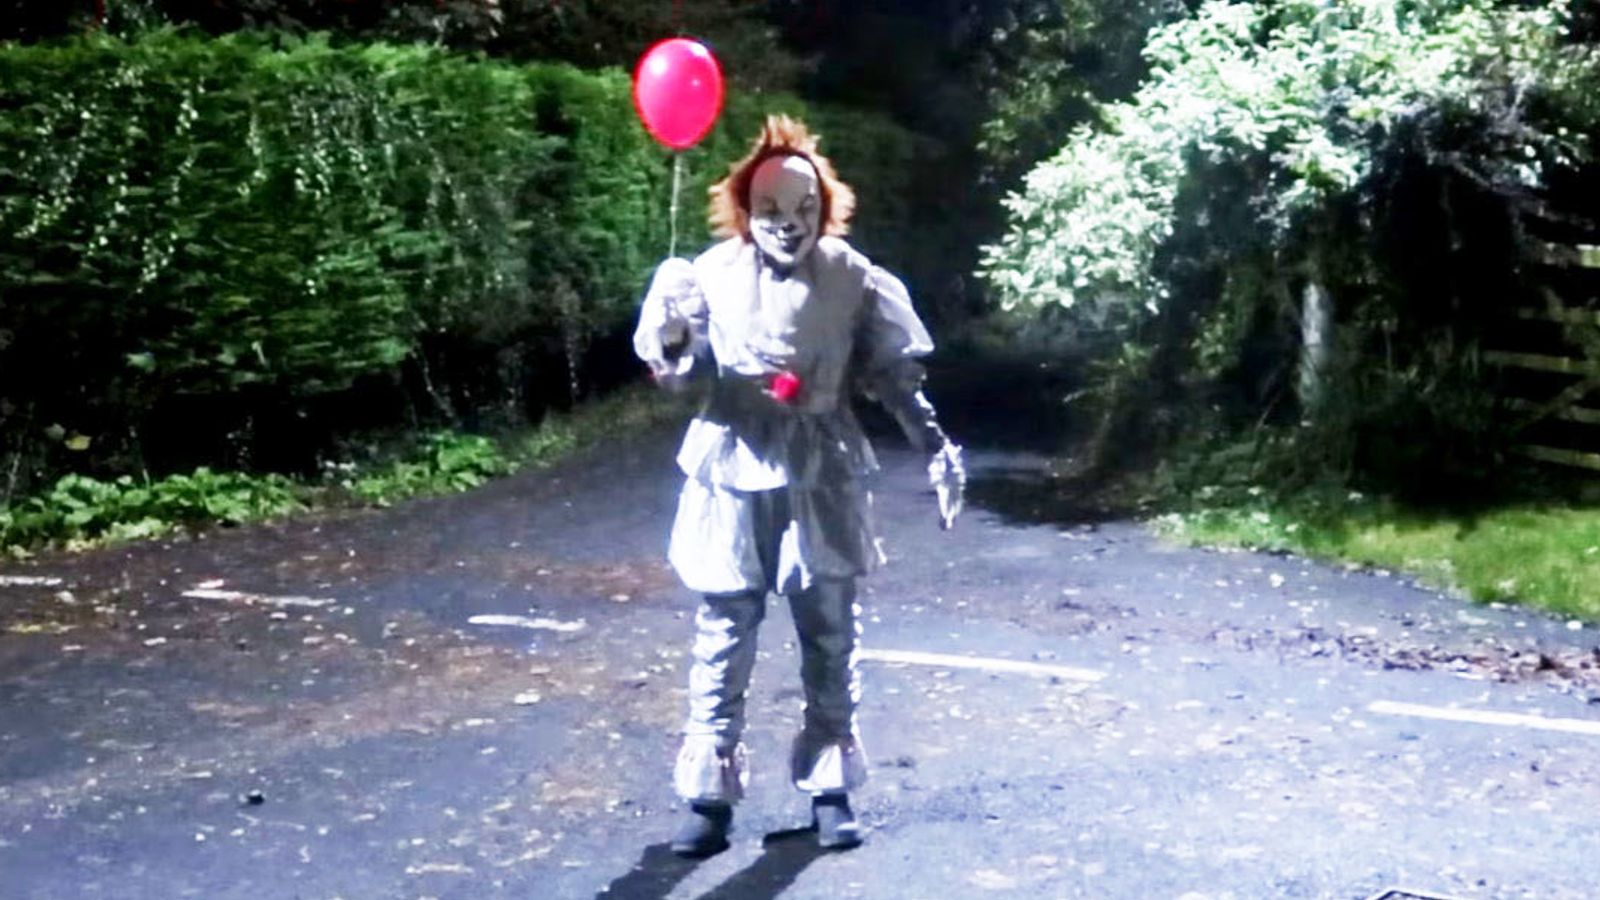 A Facebook account has been set up for the clown under the name Cole Deimos